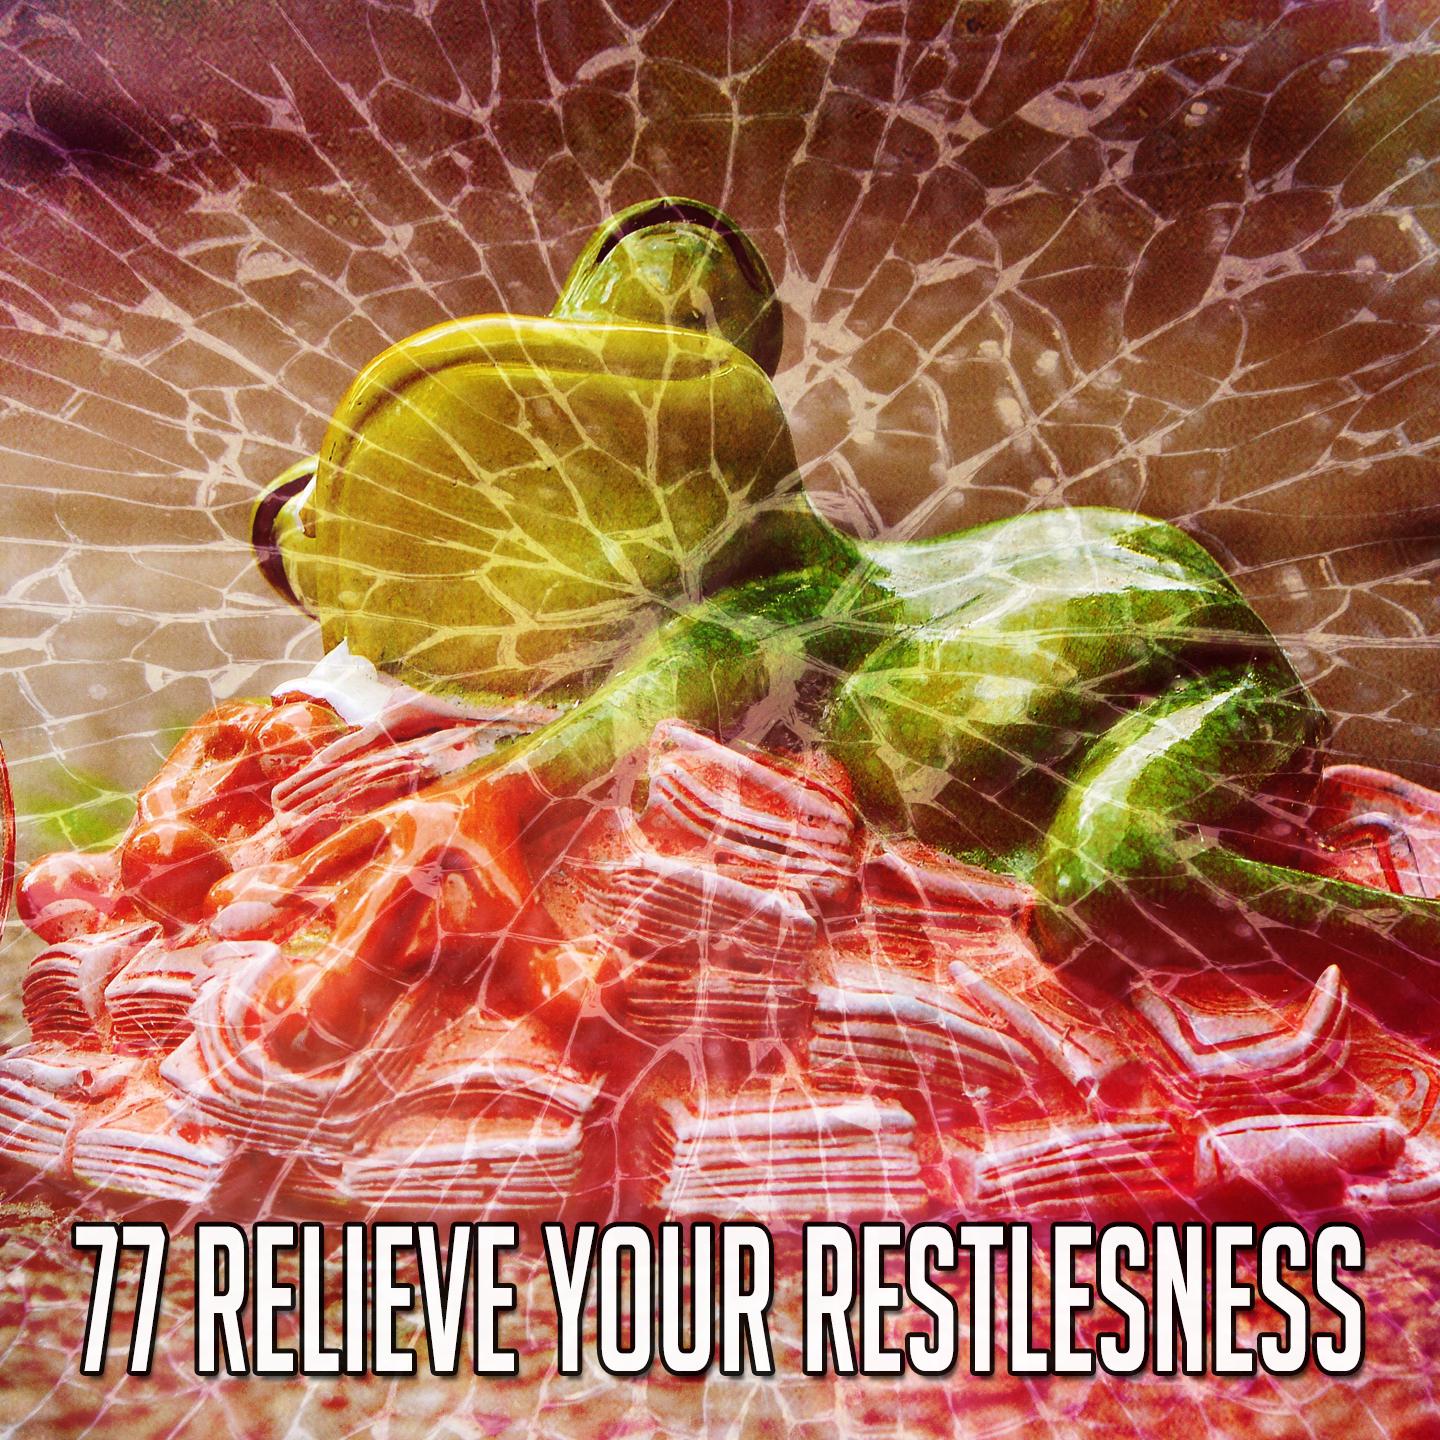 77 Relieve Your Restlesness